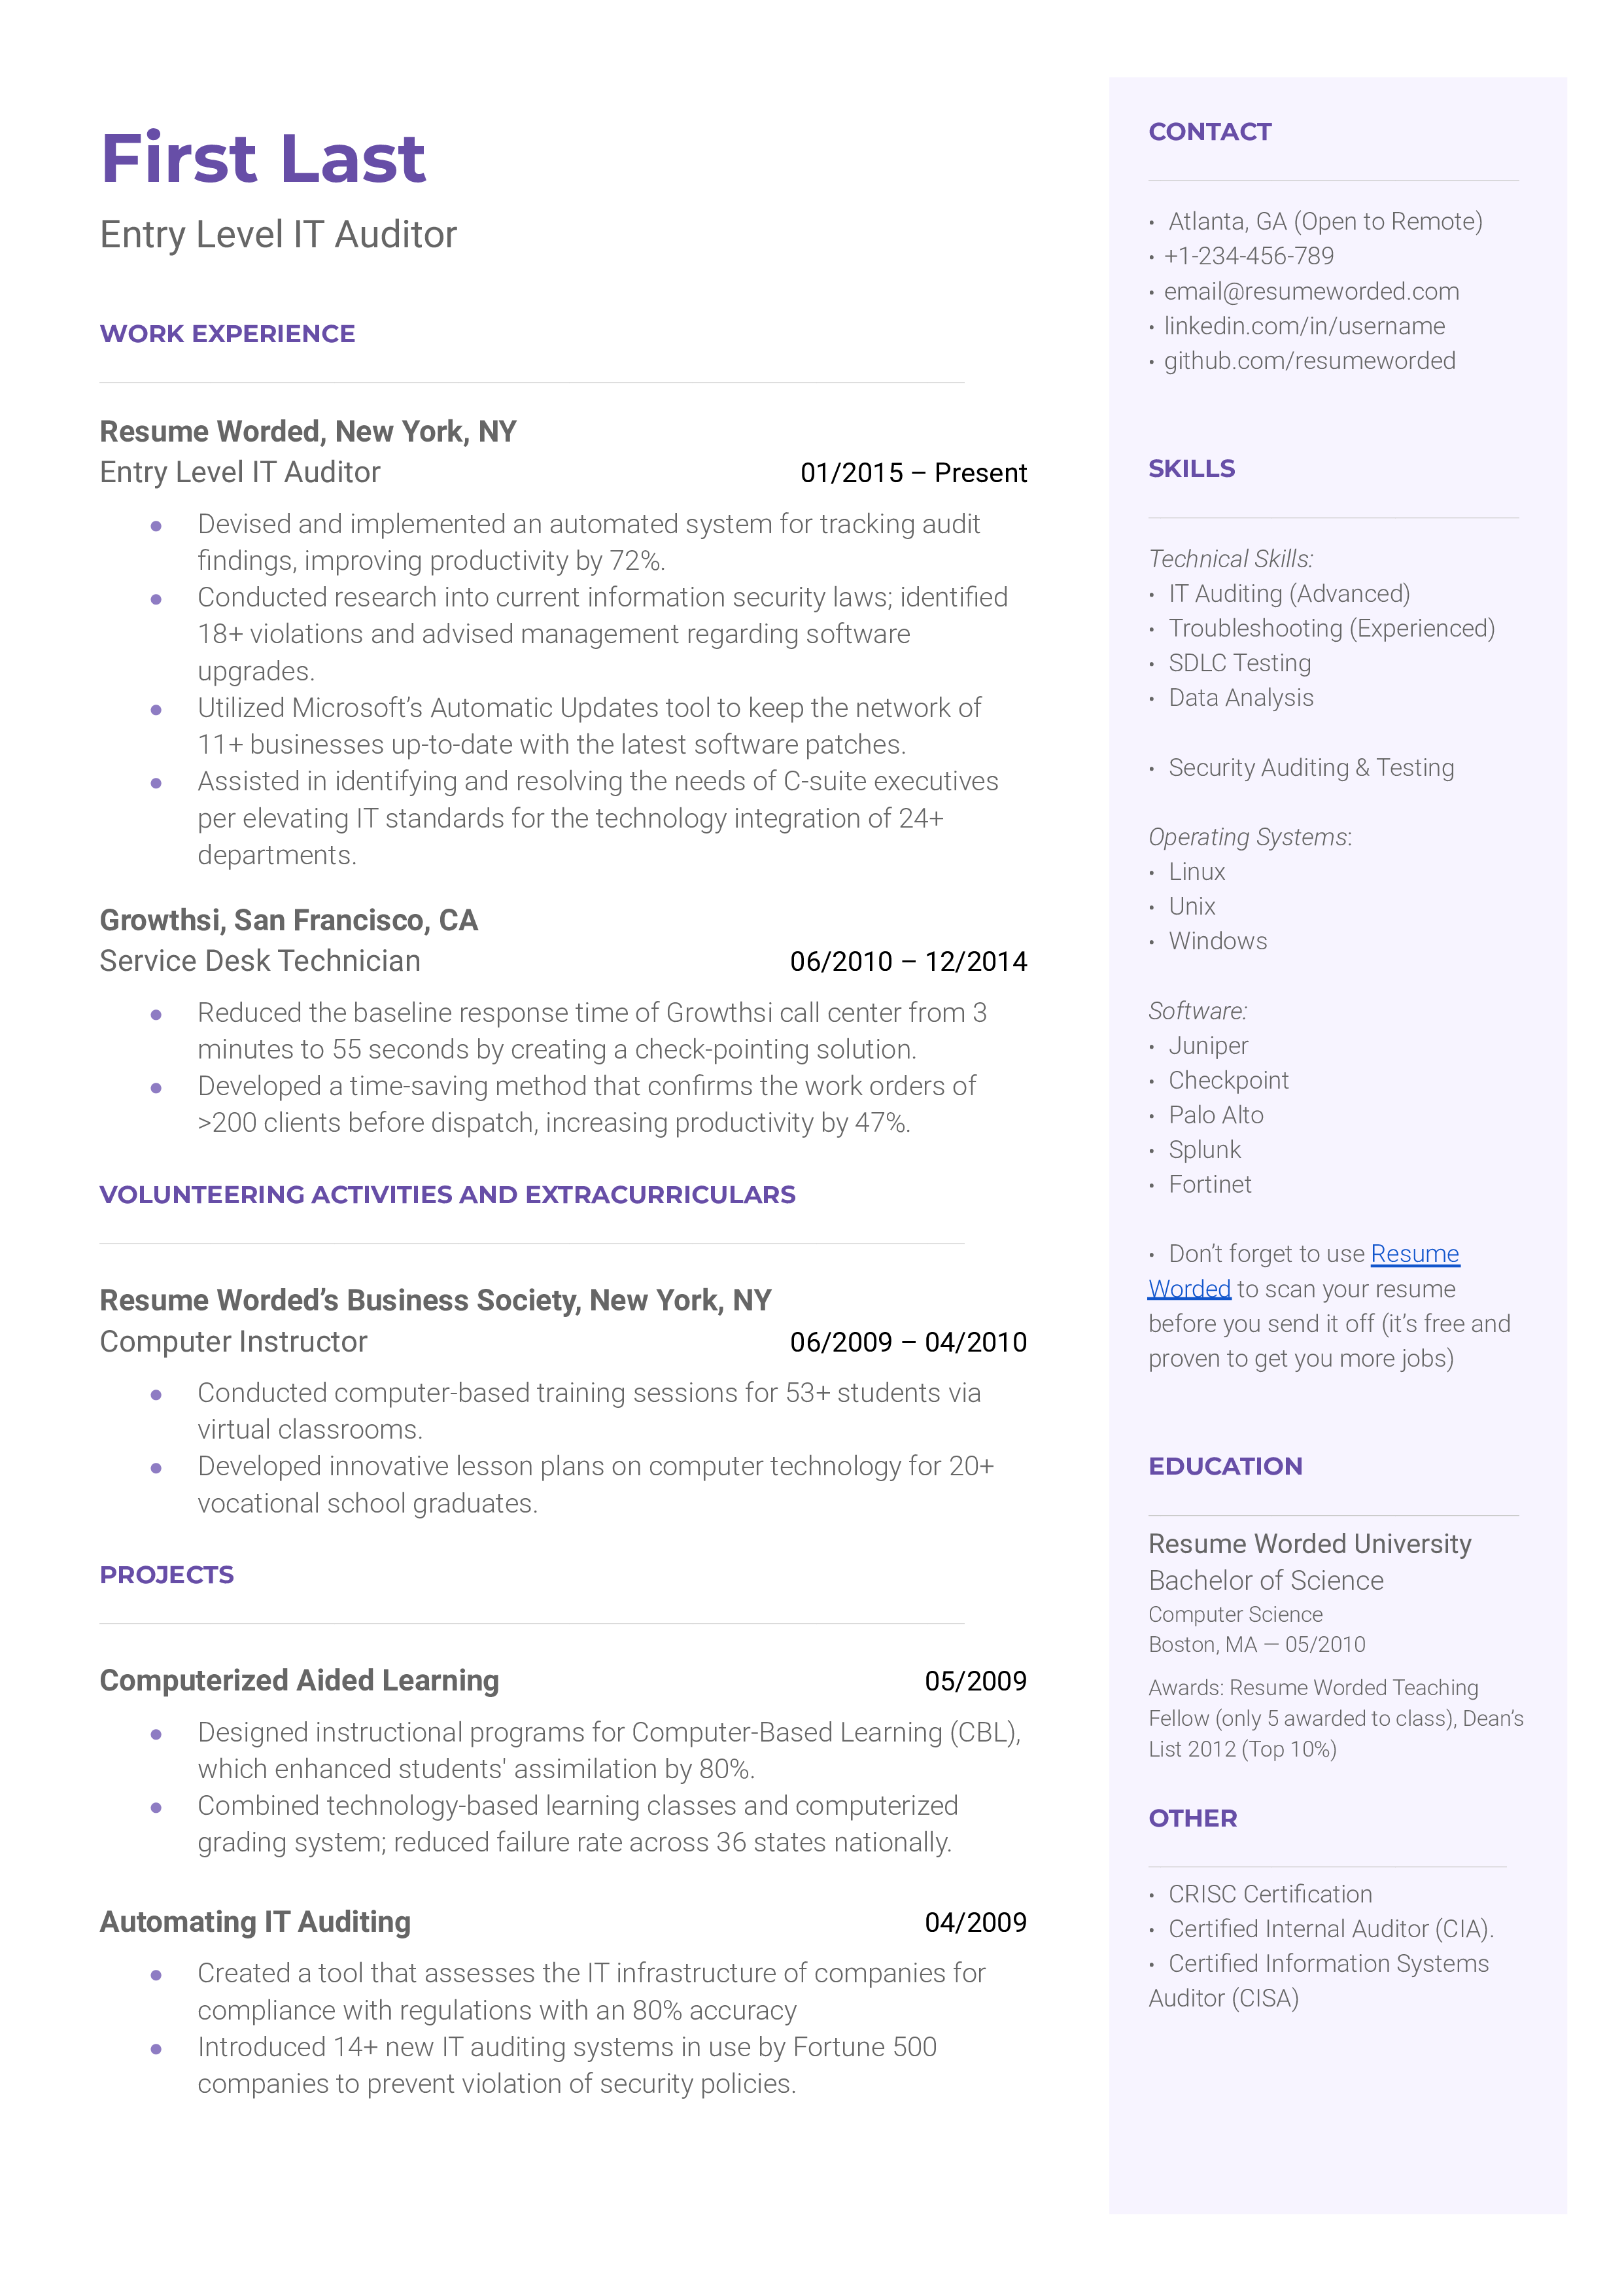 An entry-level IT auditor resume template, including extracurricular activities